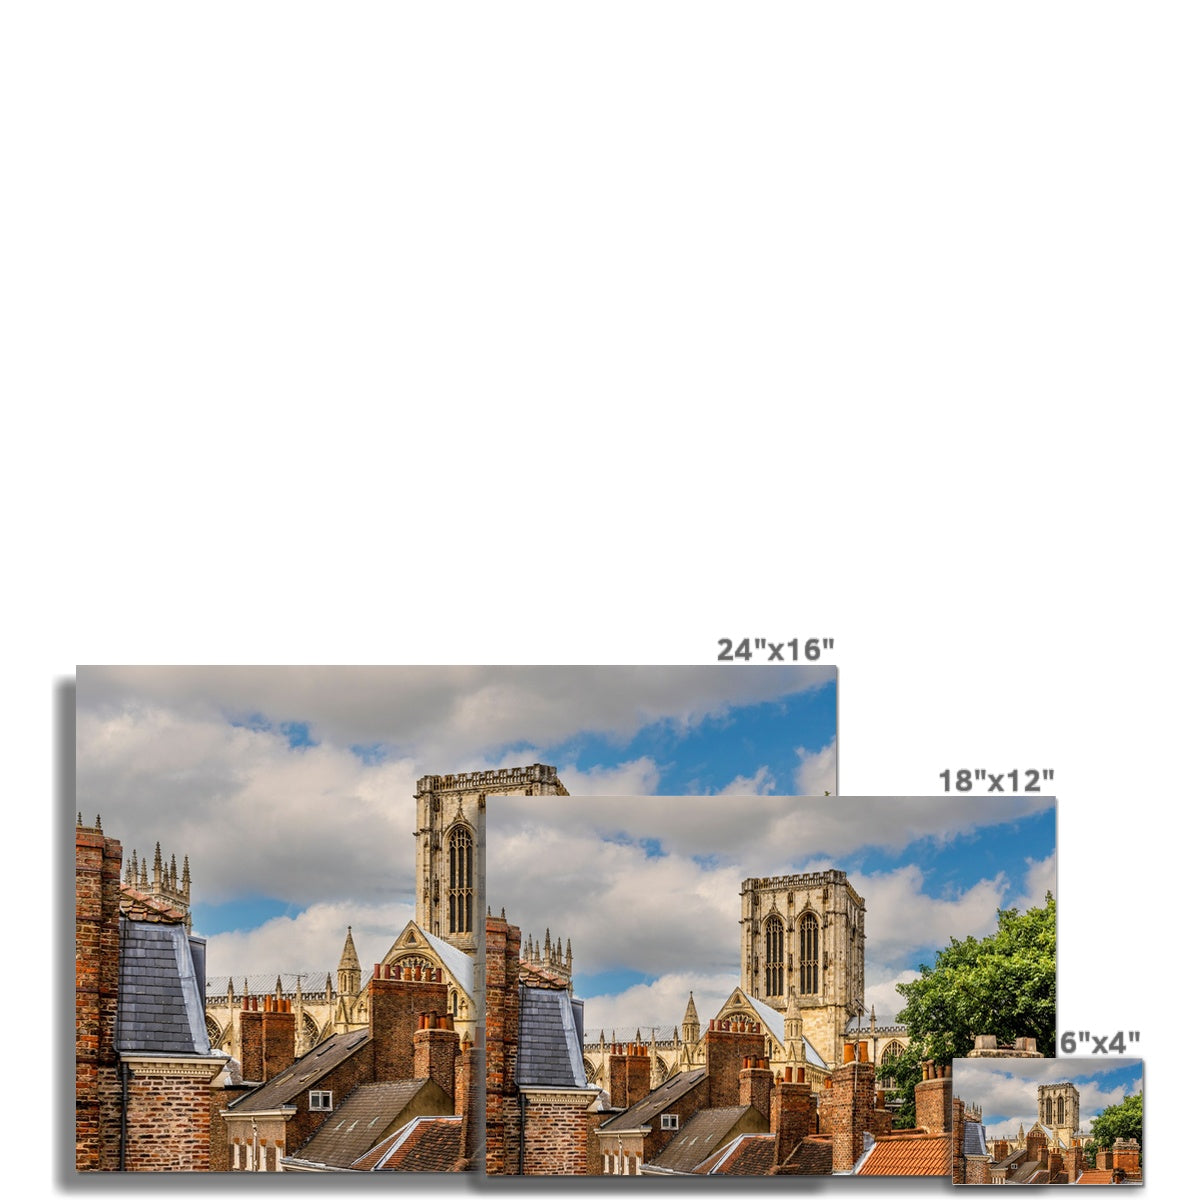 York Minster stands timeless amidst the city's rooftops. York. UK Fine Art Print